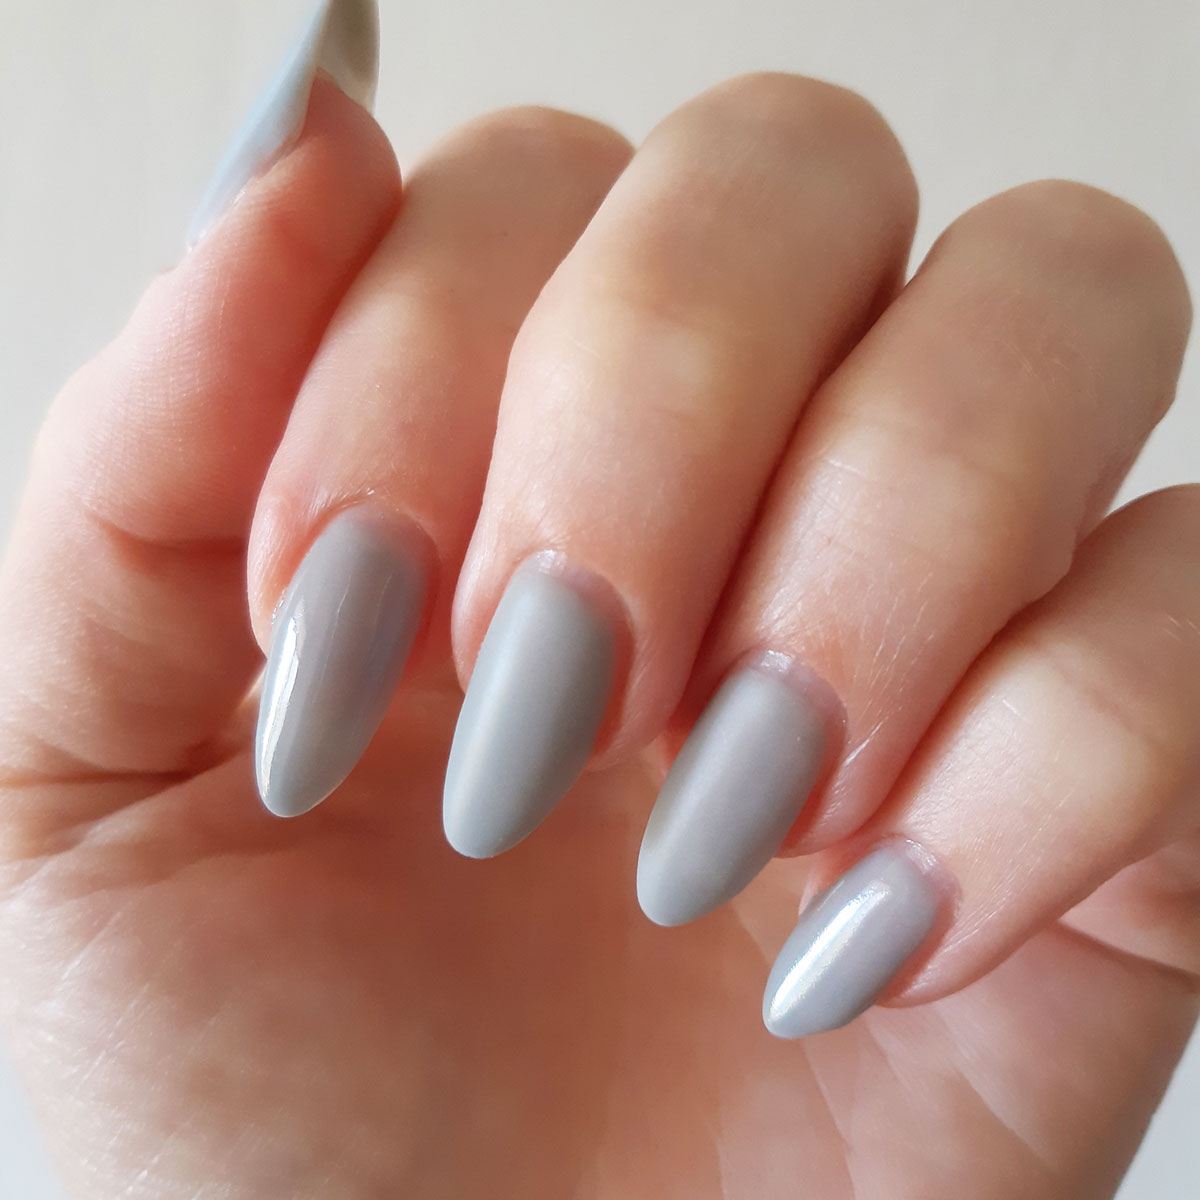 3 weeks long lasting light grey gel colour on almond nails with matte top coat on 2 middle nails and glossy top coat on the others for a very chic effect on your nails Shop the shade Winter Chic Gel Polish by Nail Art Bay Australia Gel polish Colours for nail art and nails at home